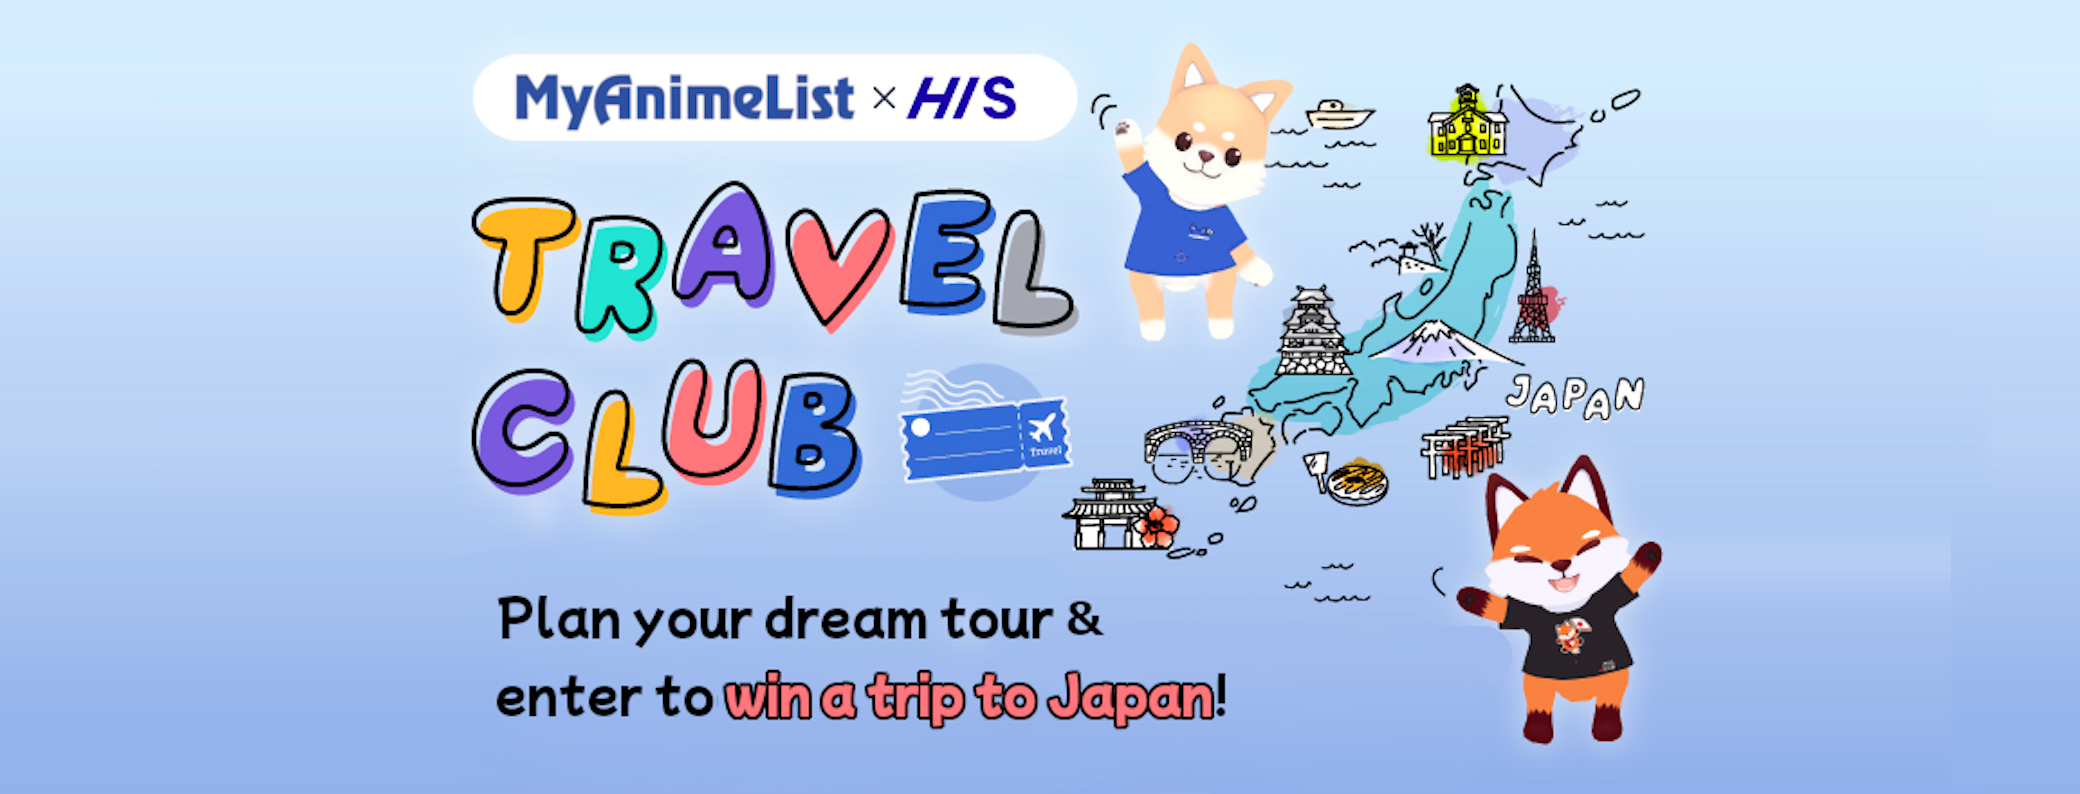 Travel Club: Plan your dream tour and enter to win a real trip to Japan!